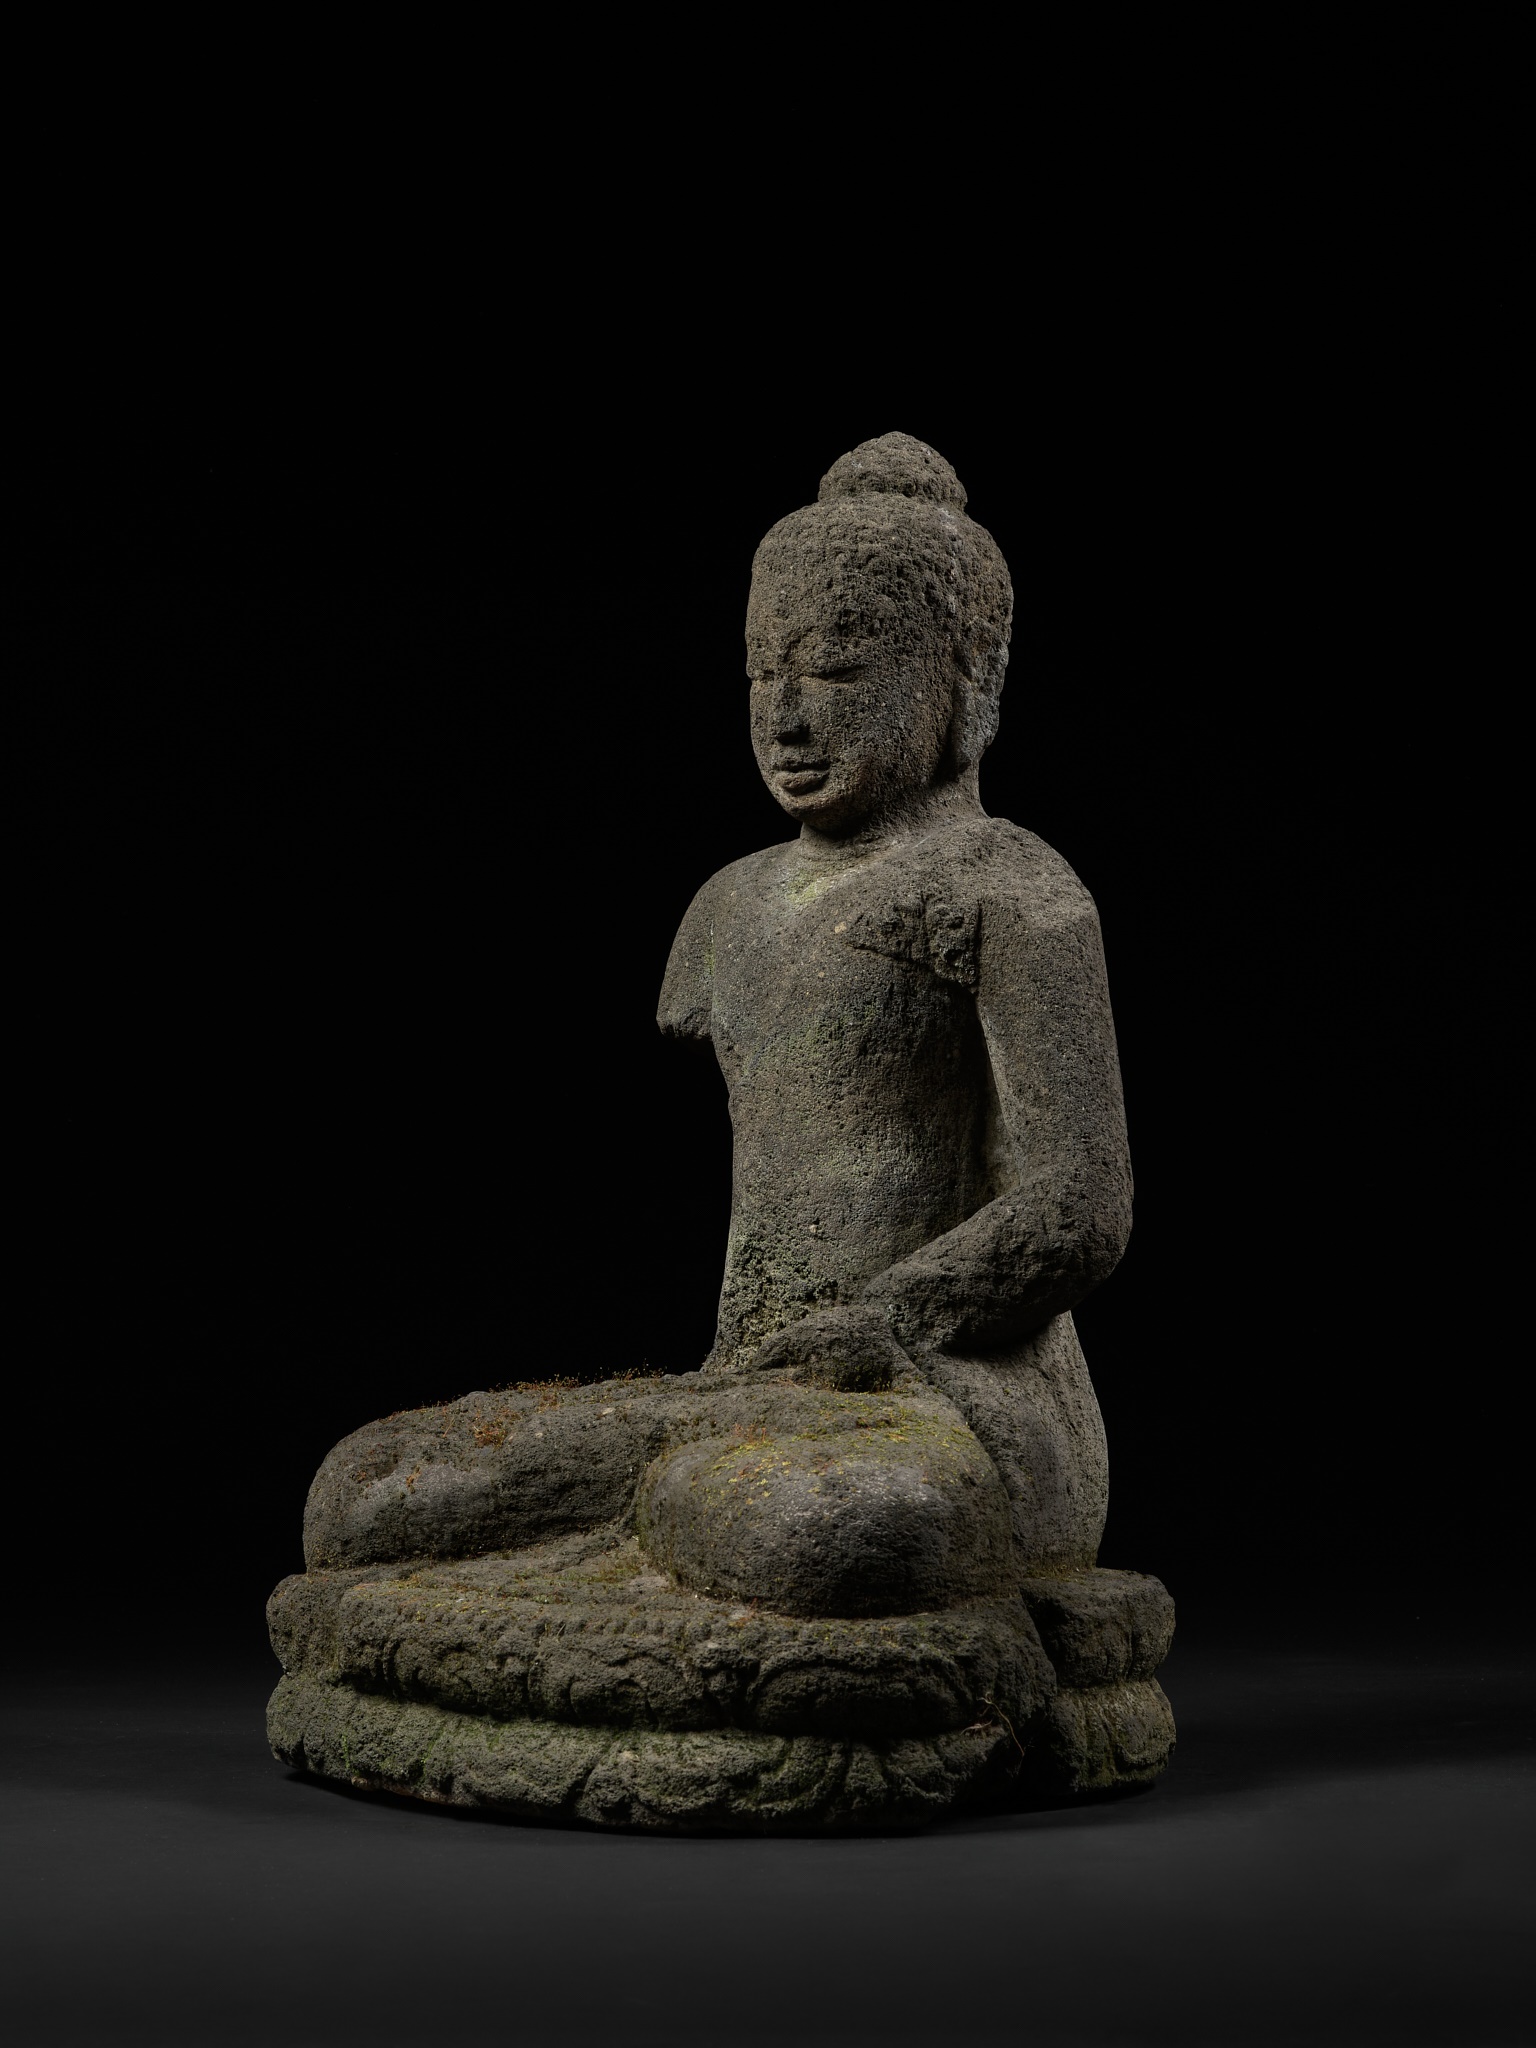 A VOLCANIC STONE FIGURE OF BUDDHA, CENTRAL JAVA, INDONESIA, FIRST HALF OF THE 9TH CENTURY - Image 11 of 14